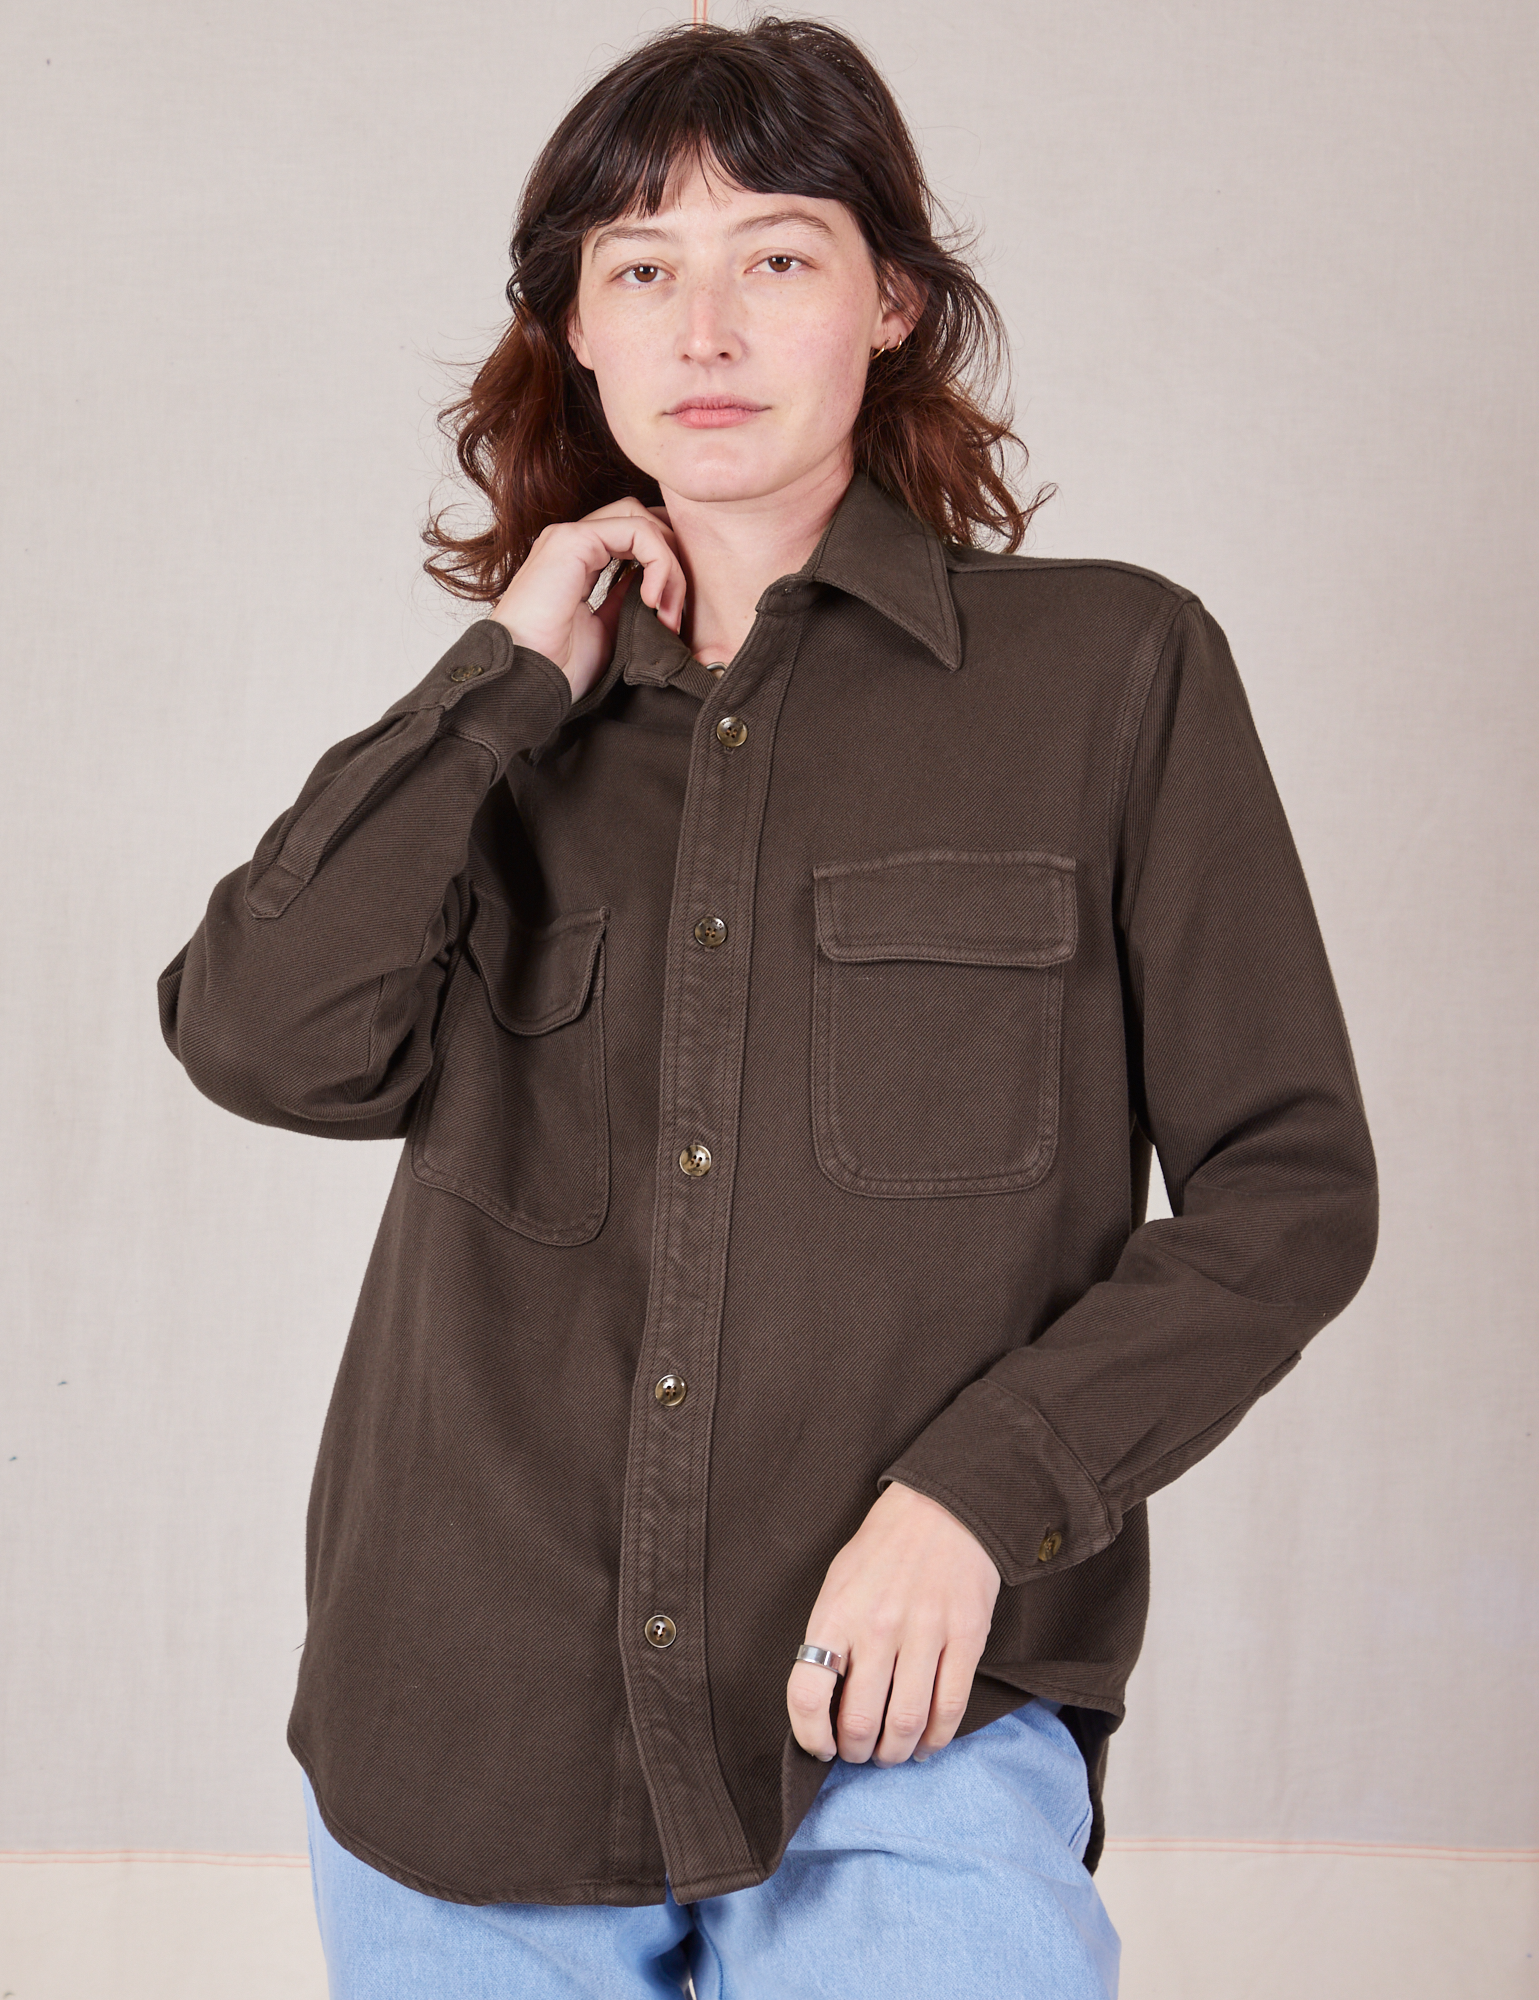 Alex is wearing a buttoned up Flannel Overshirt in Espresso Brown